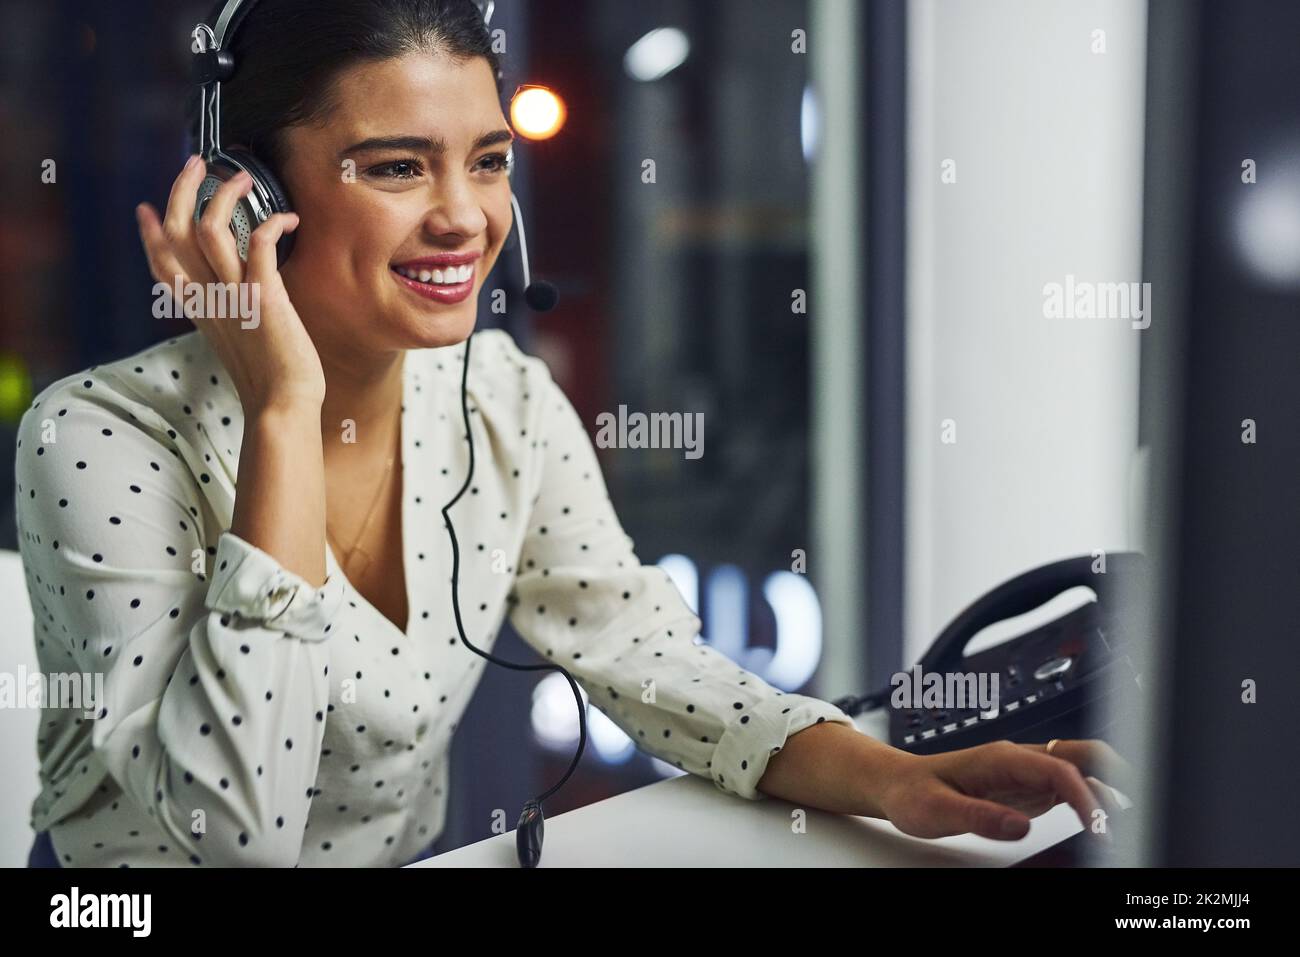 Every call is dealt with professionalism. Shot of a young call centre agent working late in an office. Stock Photo